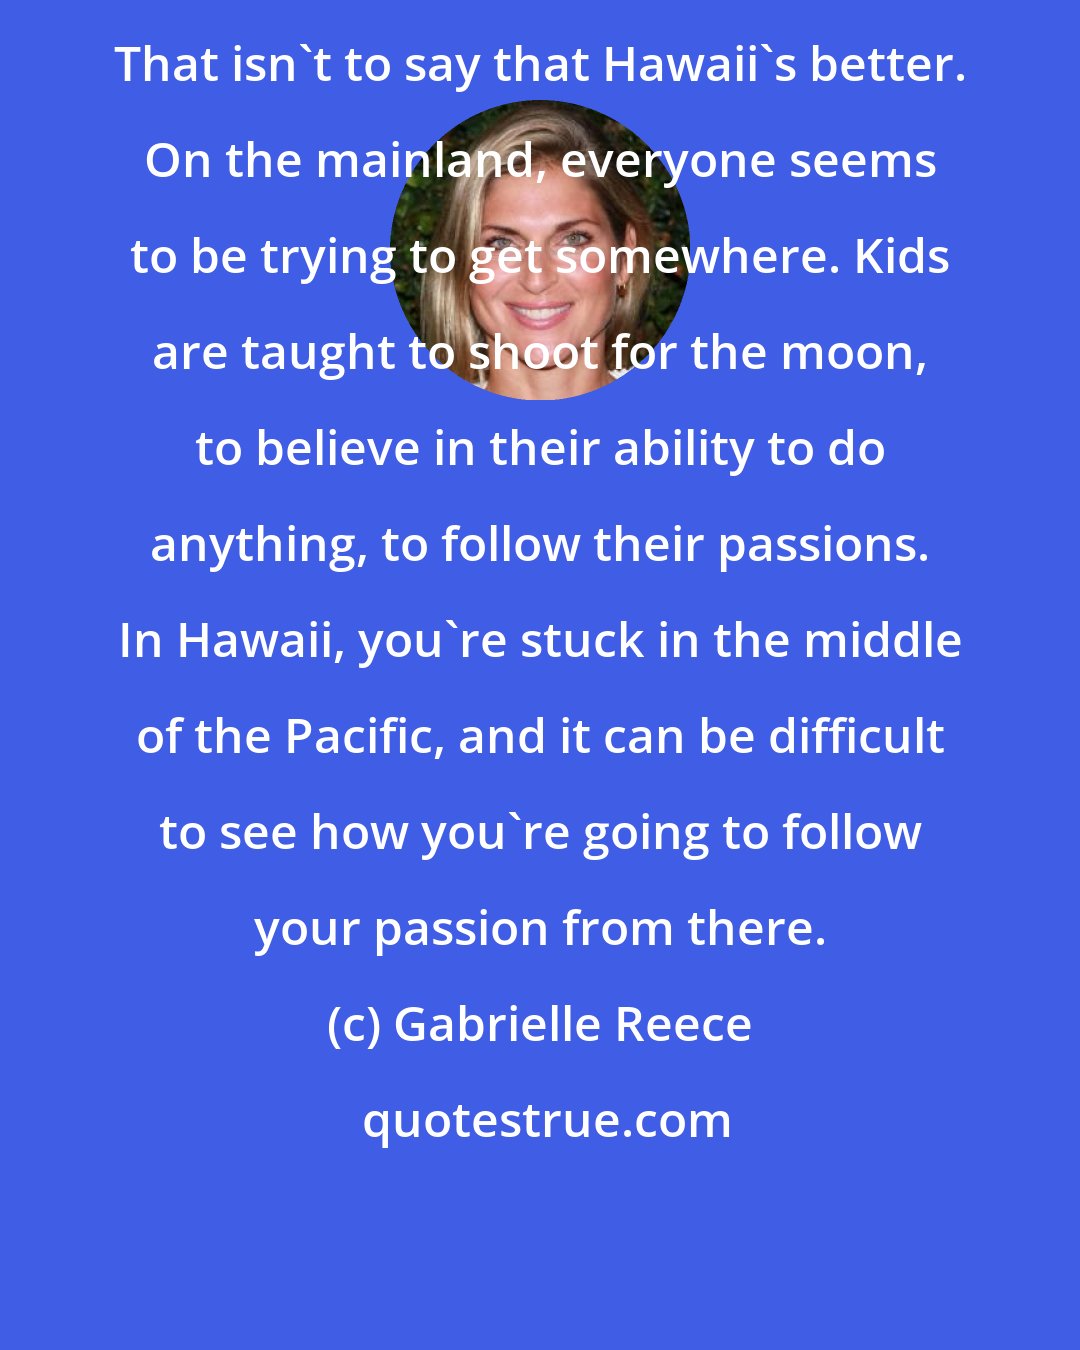 Gabrielle Reece: That isn't to say that Hawaii's better. On the mainland, everyone seems to be trying to get somewhere. Kids are taught to shoot for the moon, to believe in their ability to do anything, to follow their passions. In Hawaii, you're stuck in the middle of the Pacific, and it can be difficult to see how you're going to follow your passion from there.